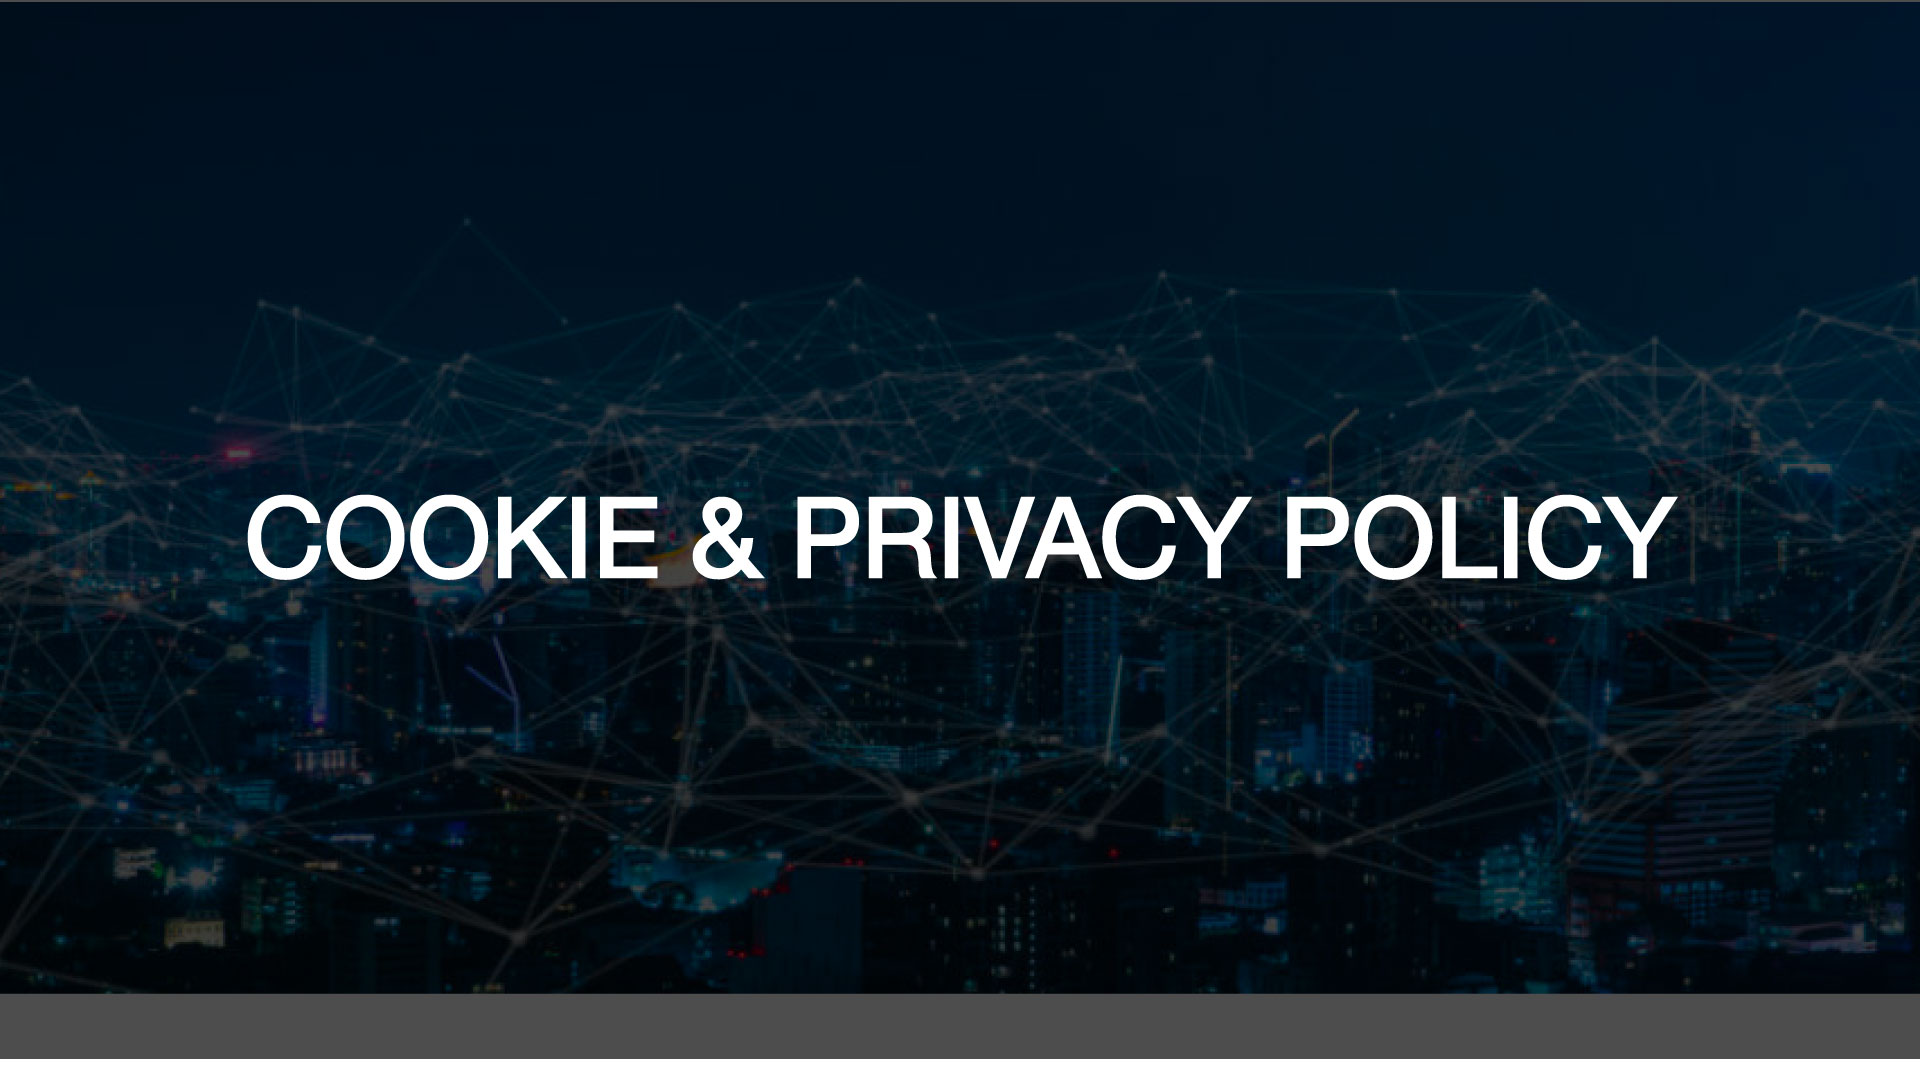 COOKIE-POLICY-BANNER